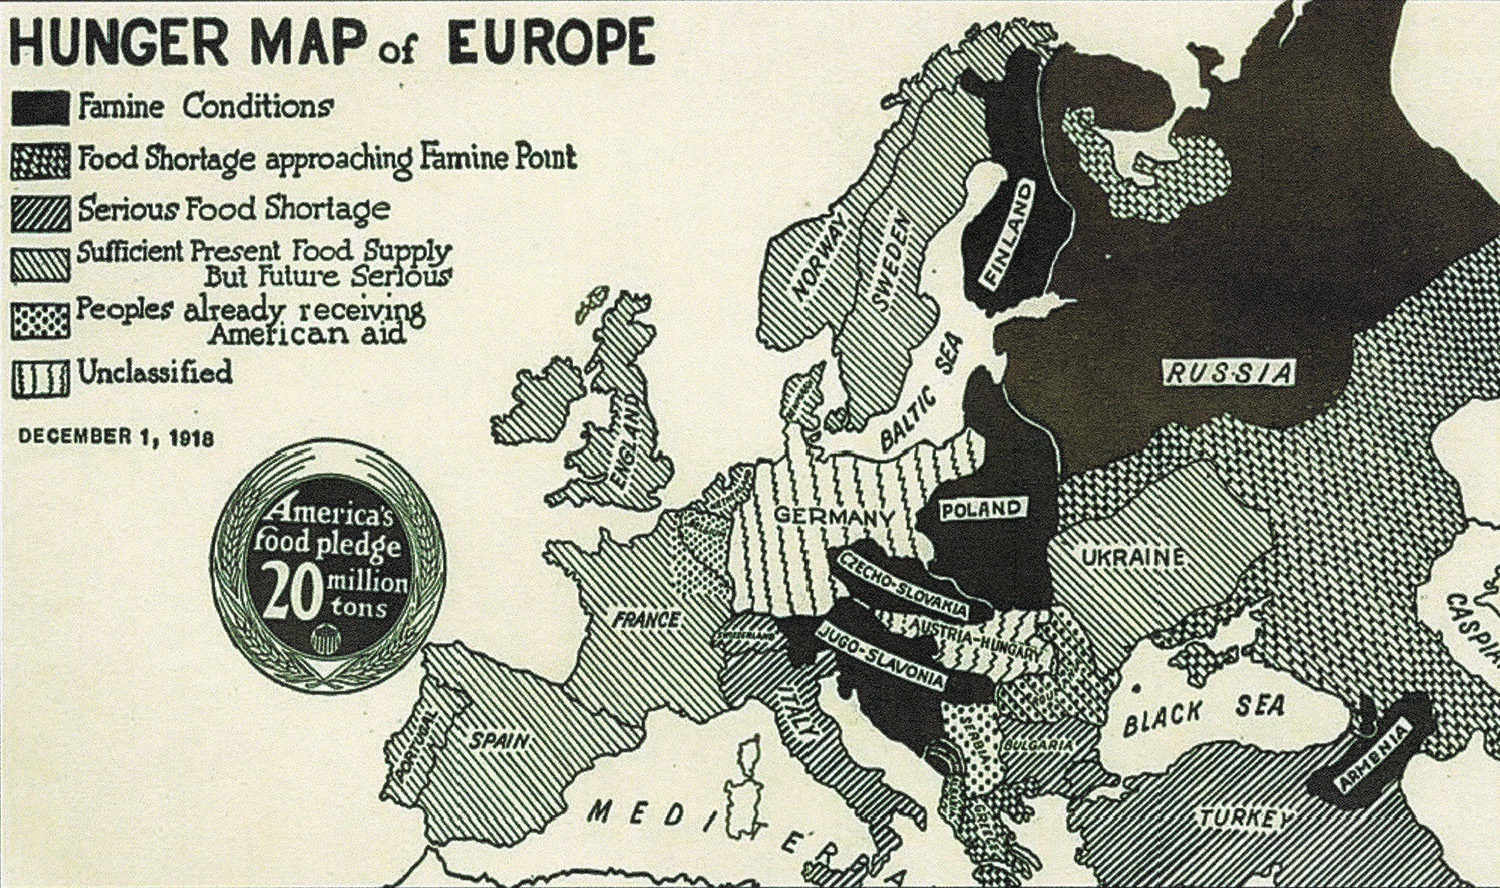 A map of Europe in 1918, which shows areas with famine conditions; areas with food shortages approaching famine conditions; areas with serious food shortages; areas that have a sufficient present food supply but future conditions are serious; areas where people are receiving American aid; and areas that are unclassified.